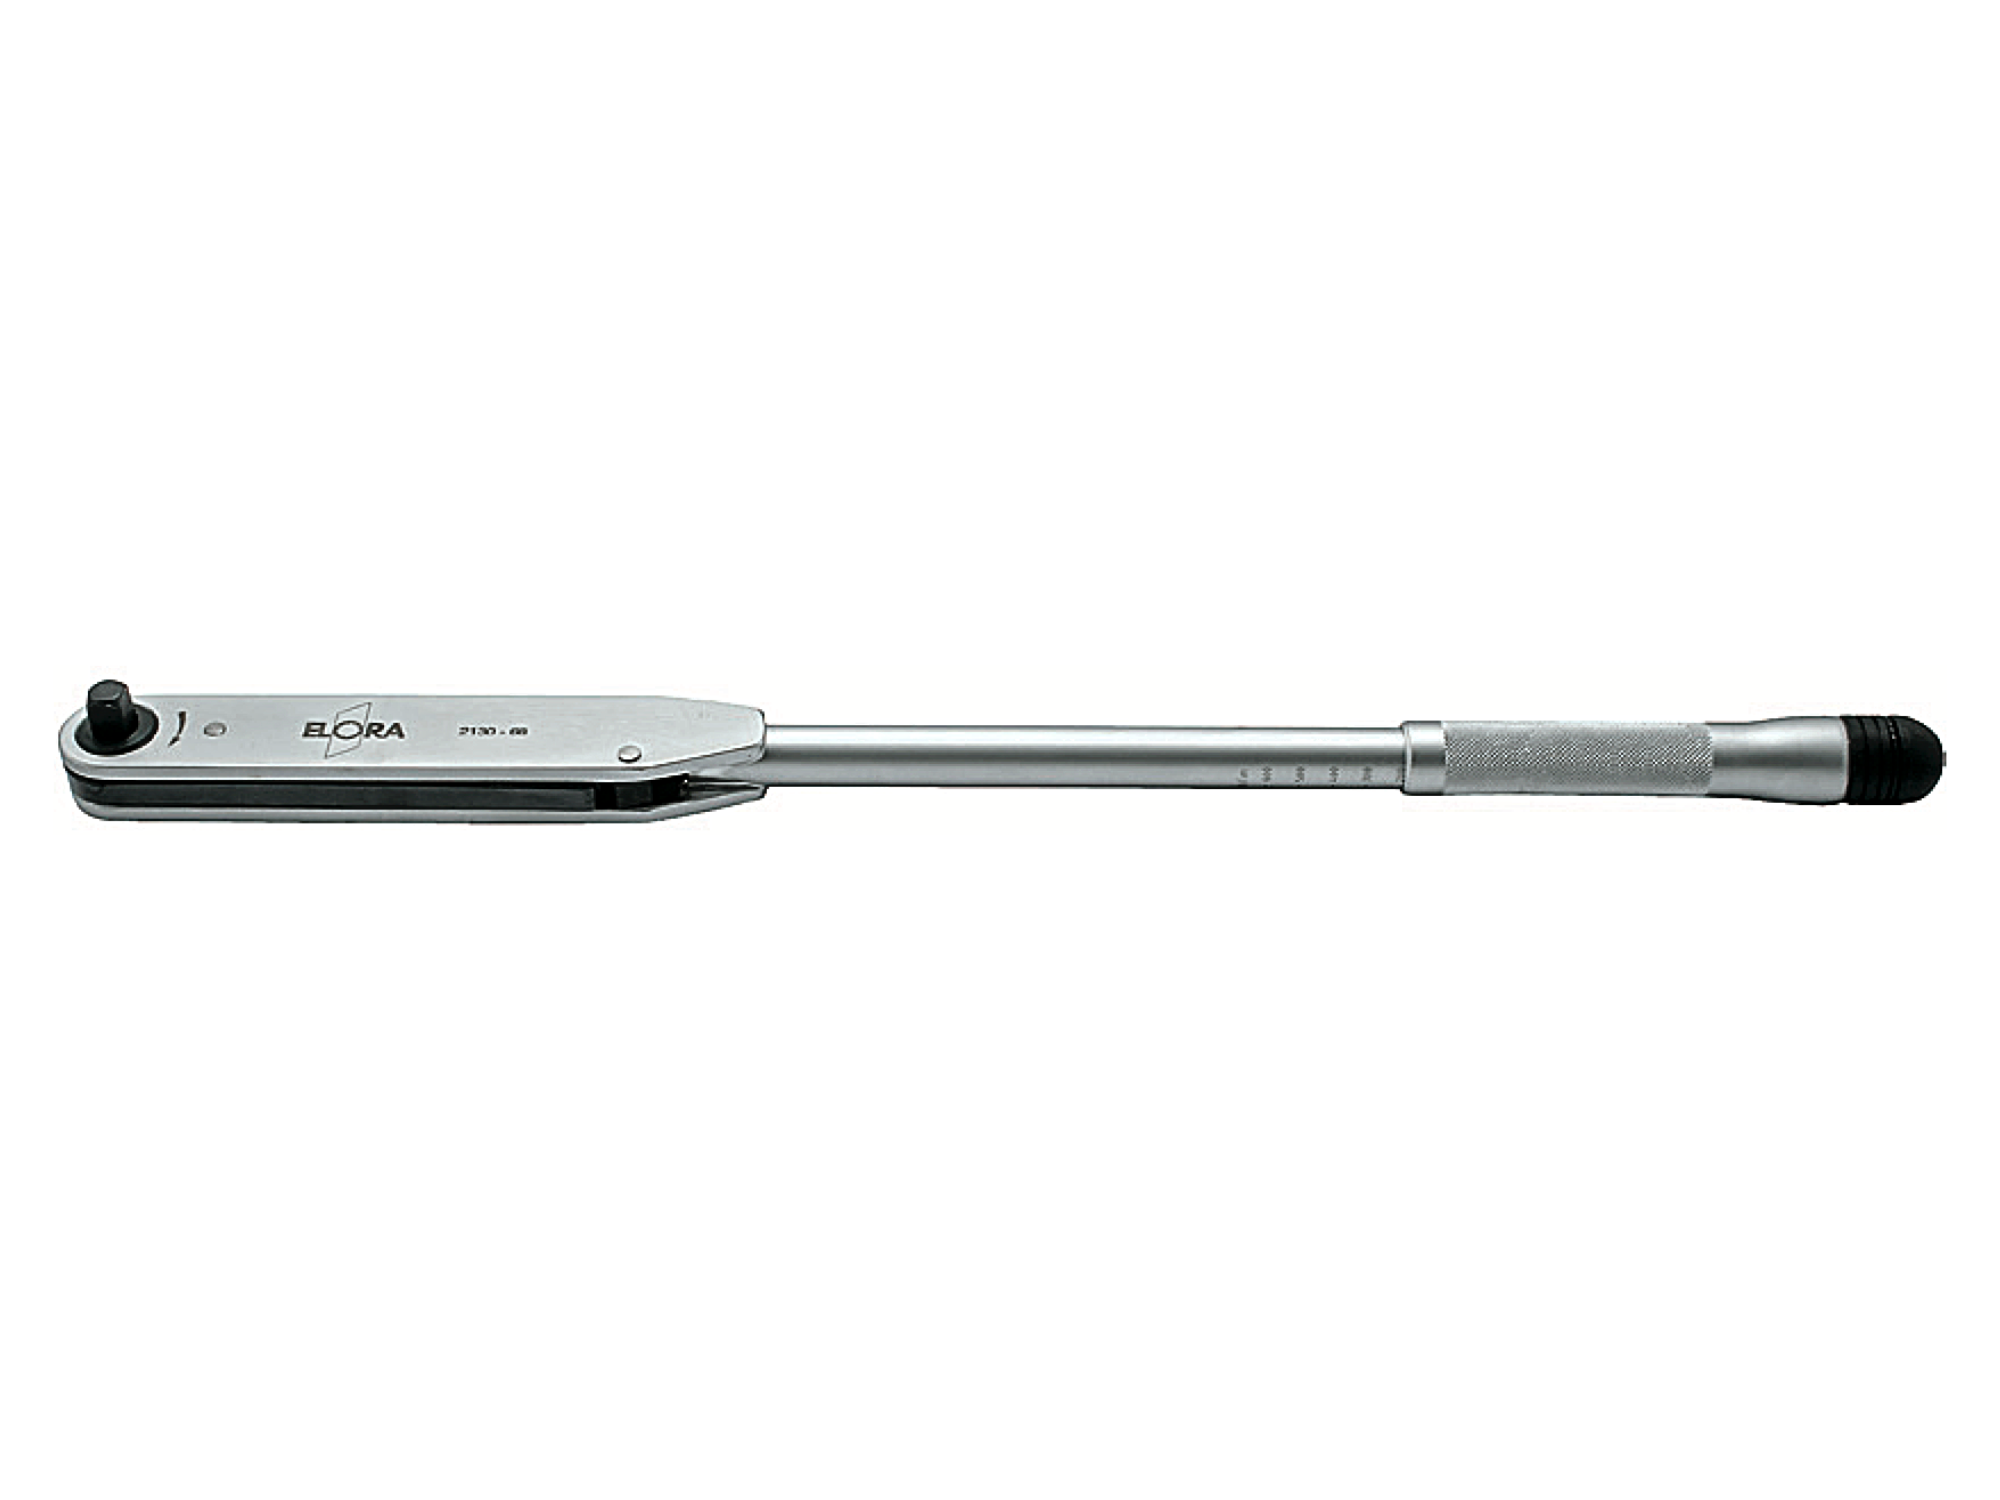 ELORA 2160-940/2000 1" Torque Wrench (ELORA Tools) - Premium 1" Torque Wrench from ELORA - Shop now at Yew Aik.